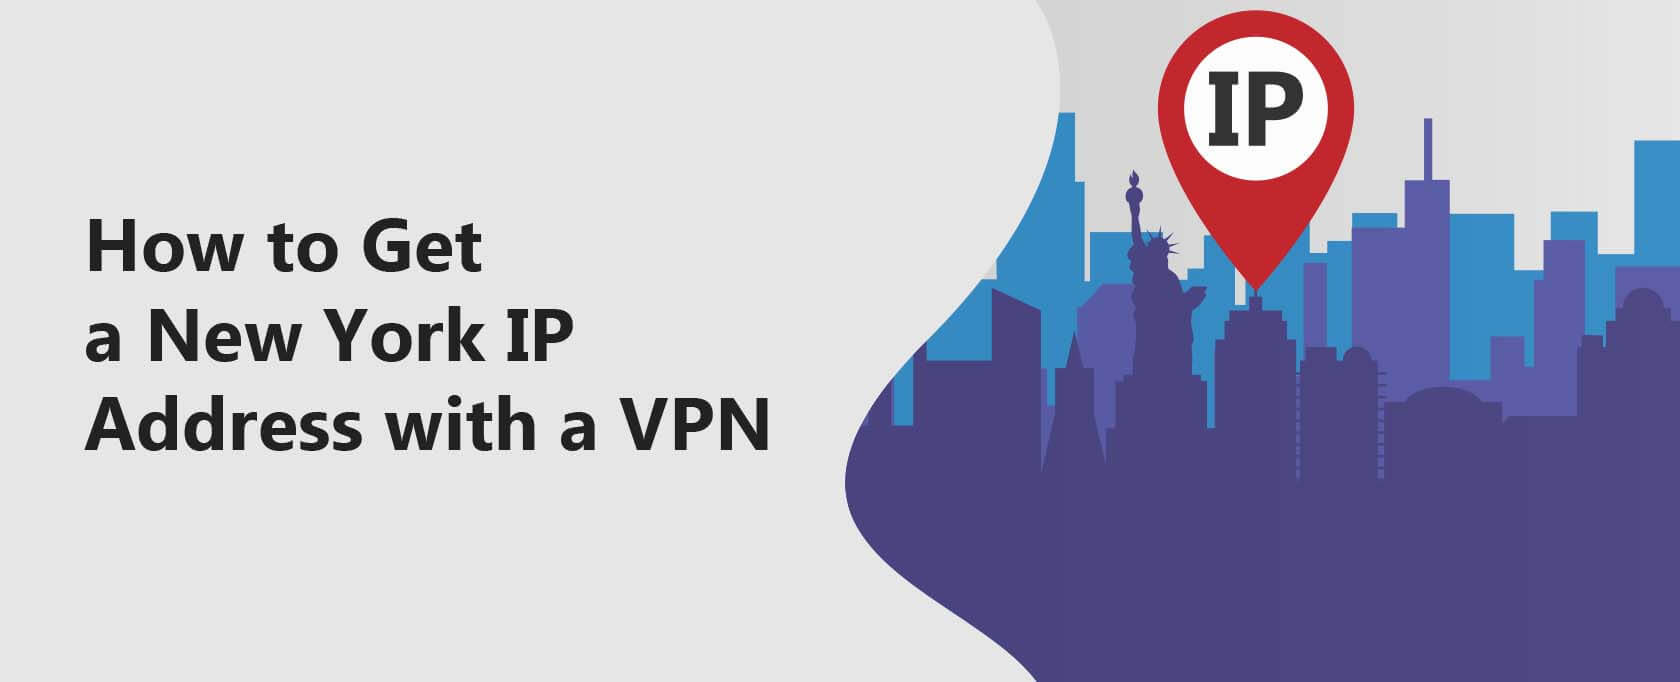 New York VPN: How to Get a New York IP Address?